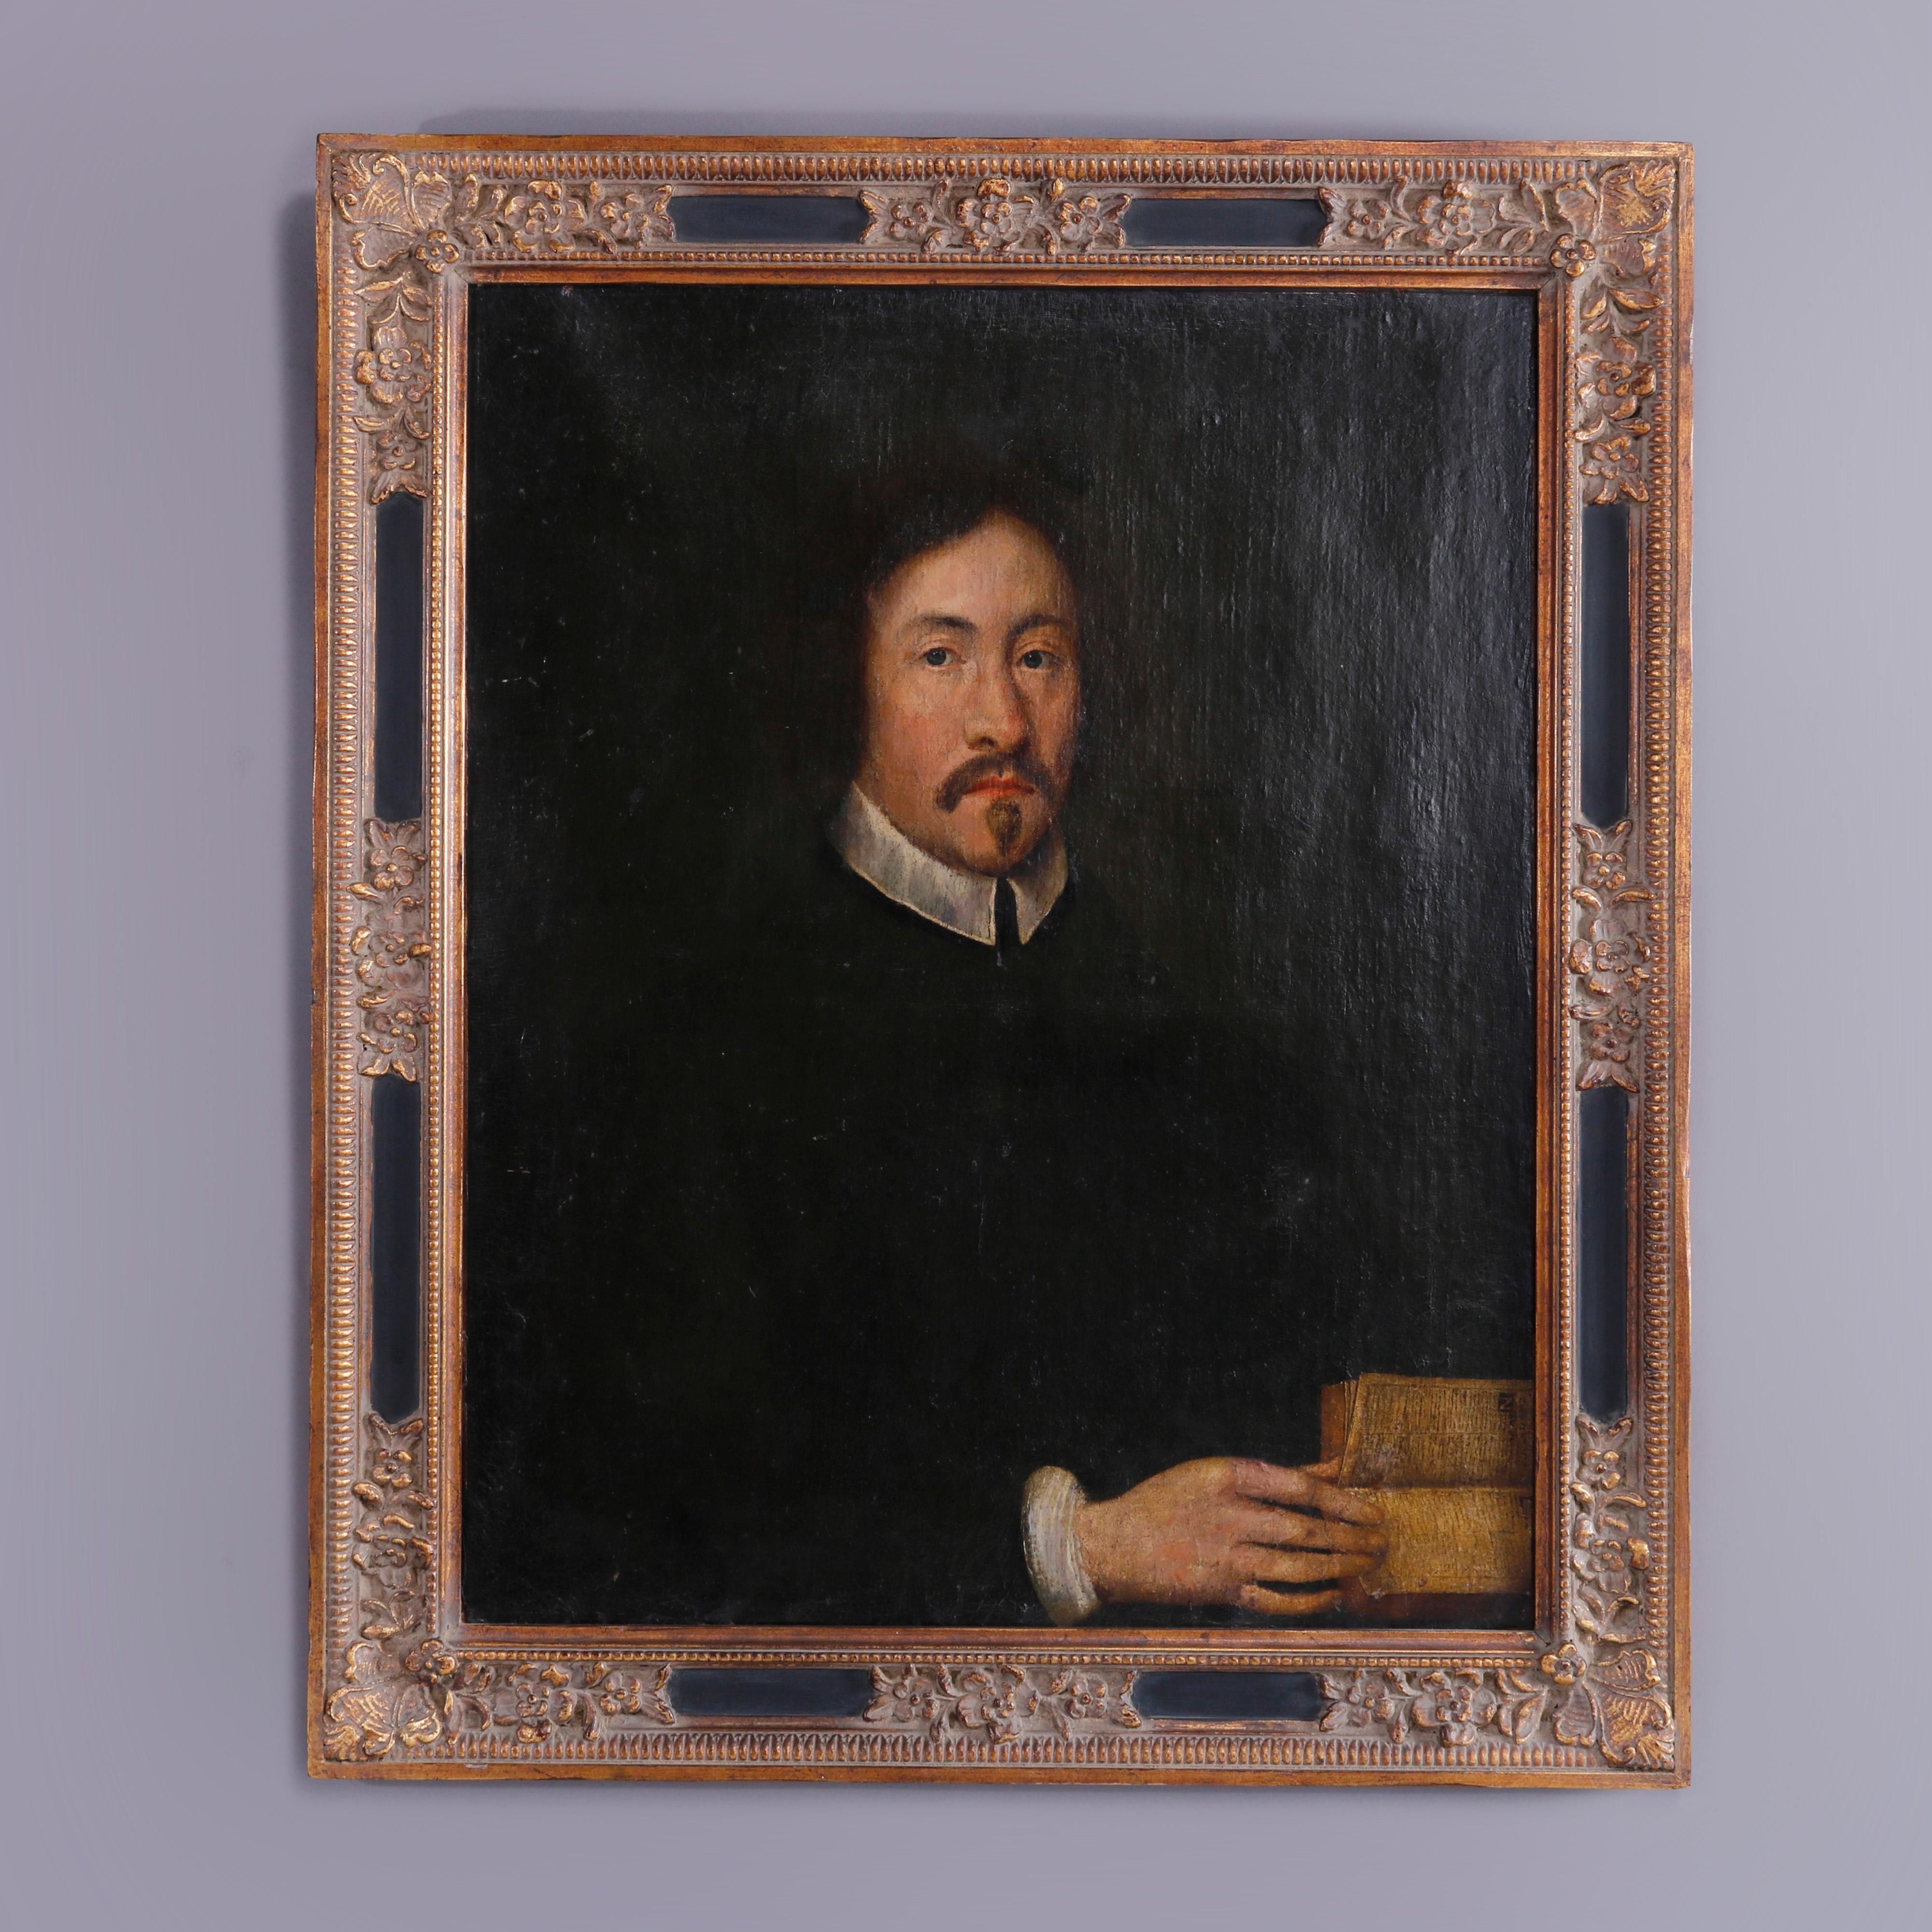 An antique Dutch painting offers oil on canvas portrait of a gentleman scholar, seated in parcel gilt frame, 18th century

Measures - 27.25''h x 33.25''w x 1.75''d; sight 21.75'' x 27.5''.